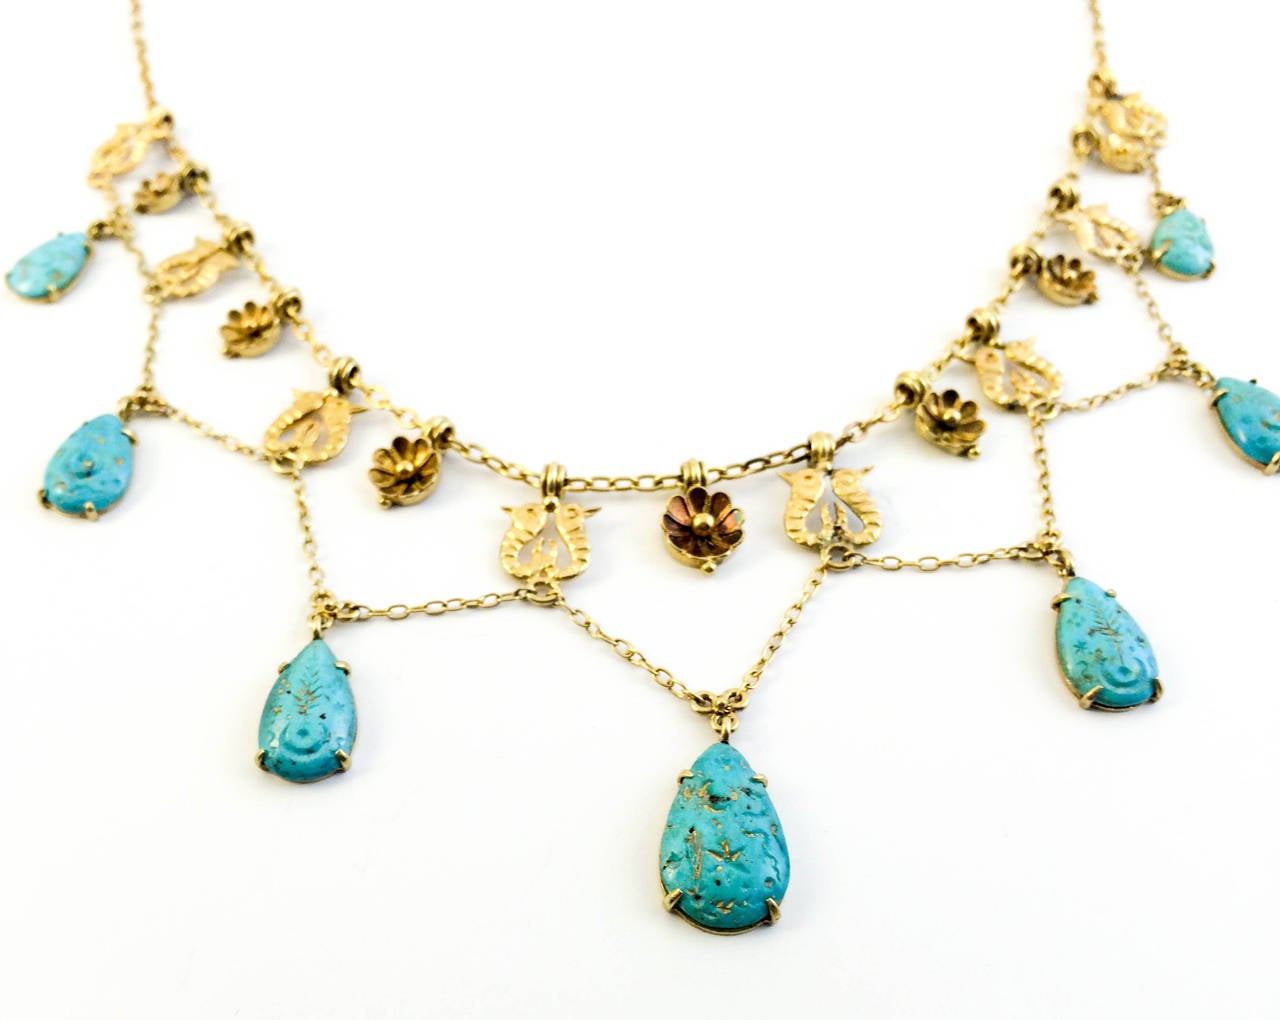 Egyptian Revival Turquoise and Gold Necklace - 1920s